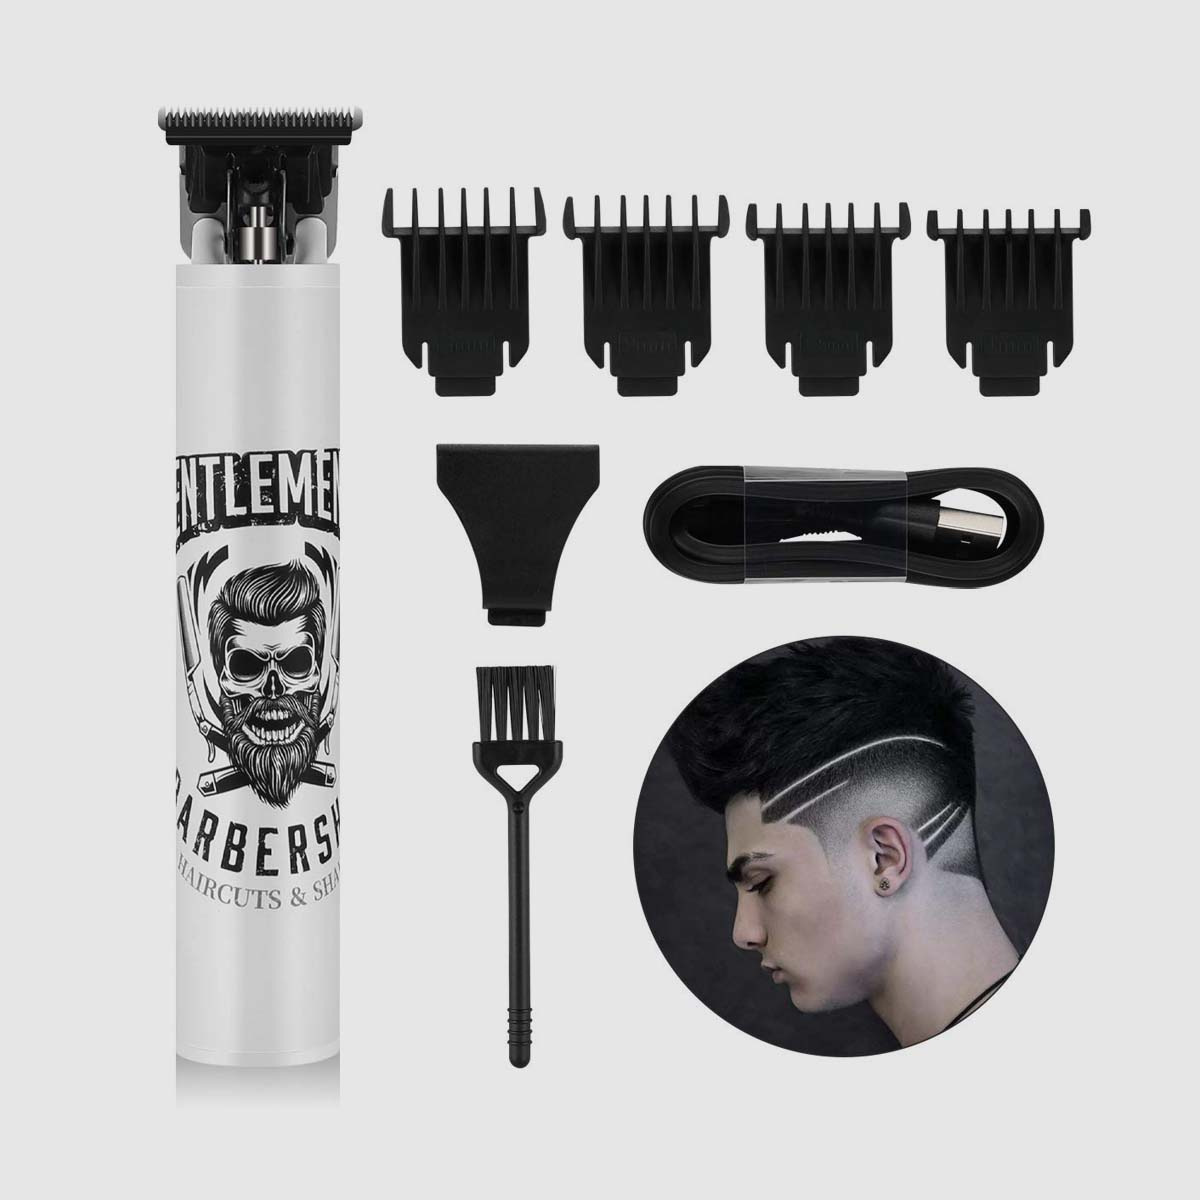 Electric Pro Li Outliner Clippers Barber Grooming Kit